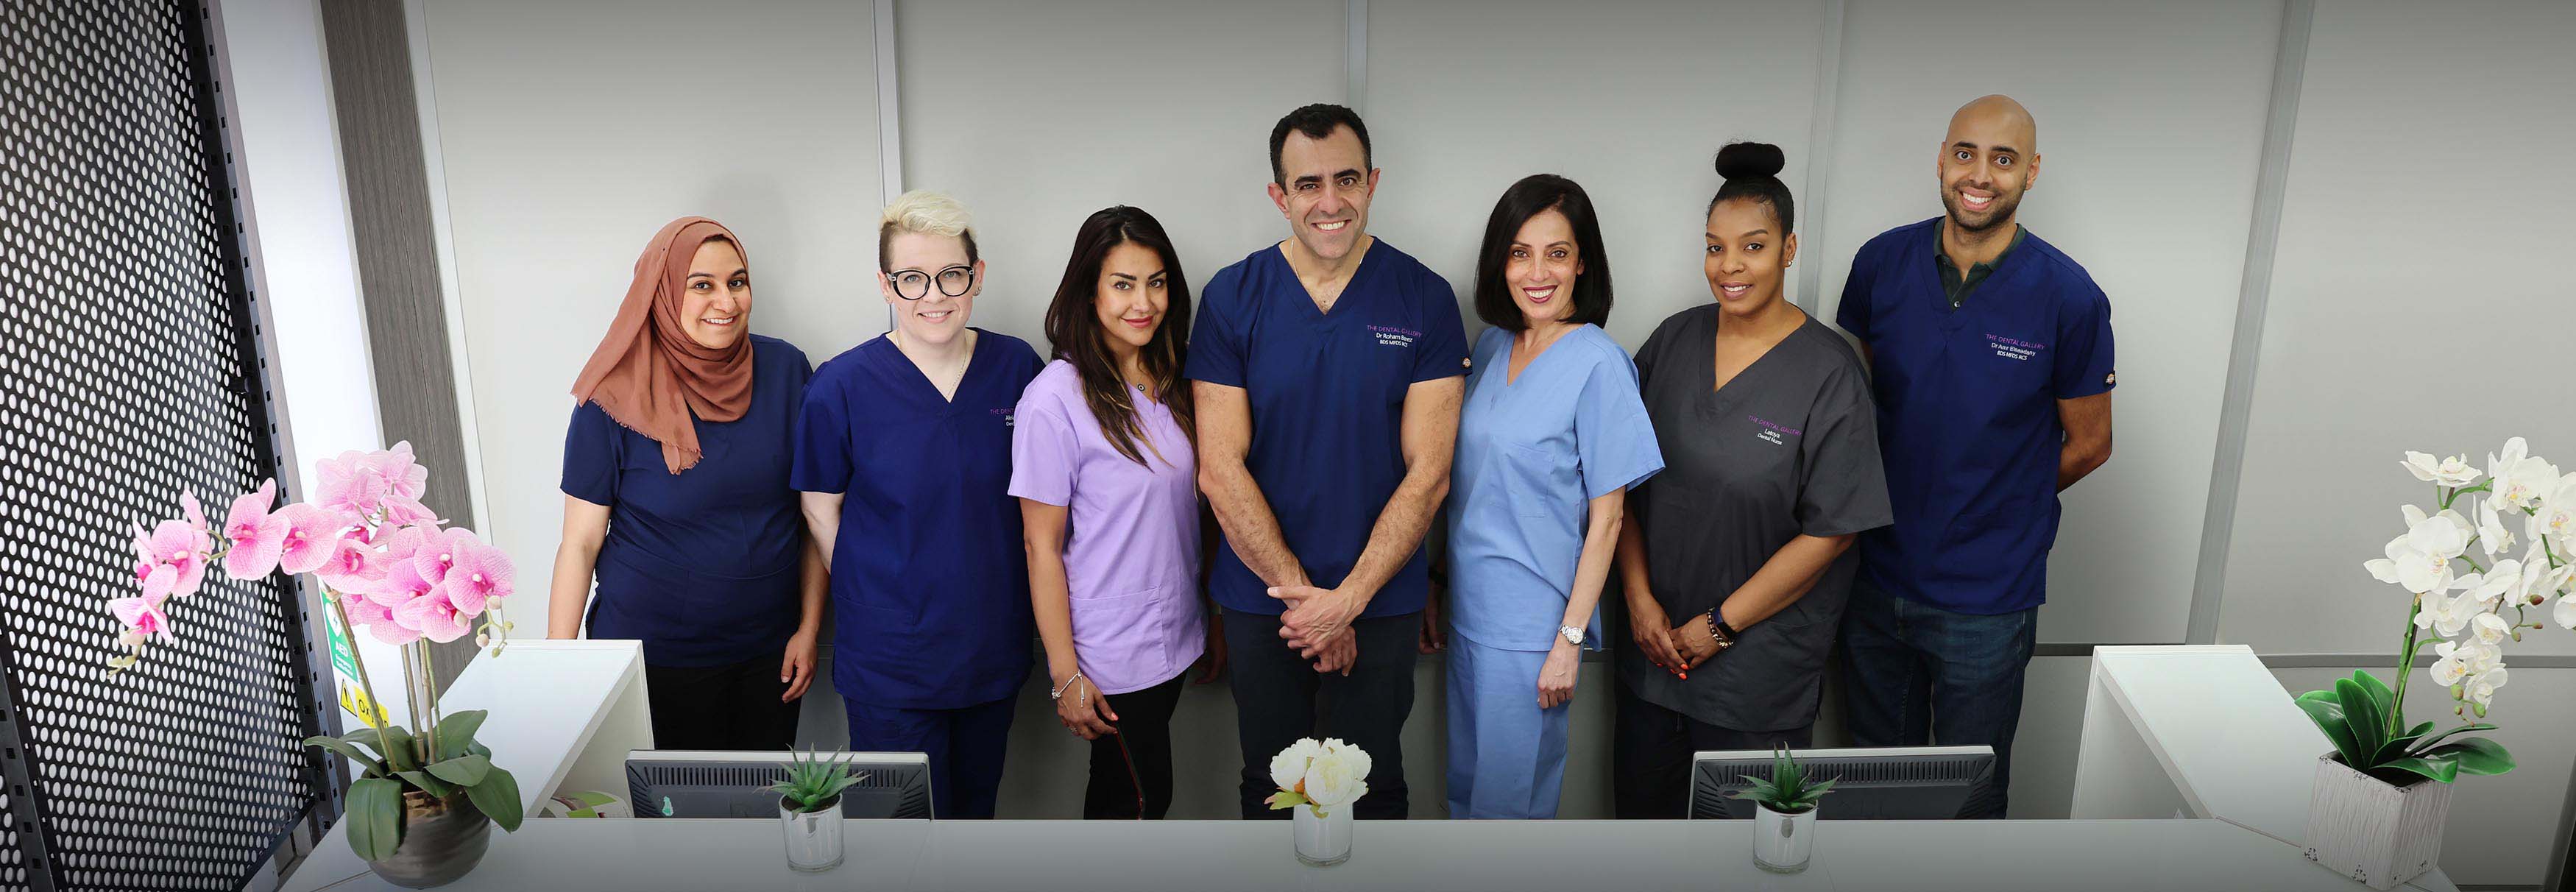 Meet the team at the Dental Gallery Ealing